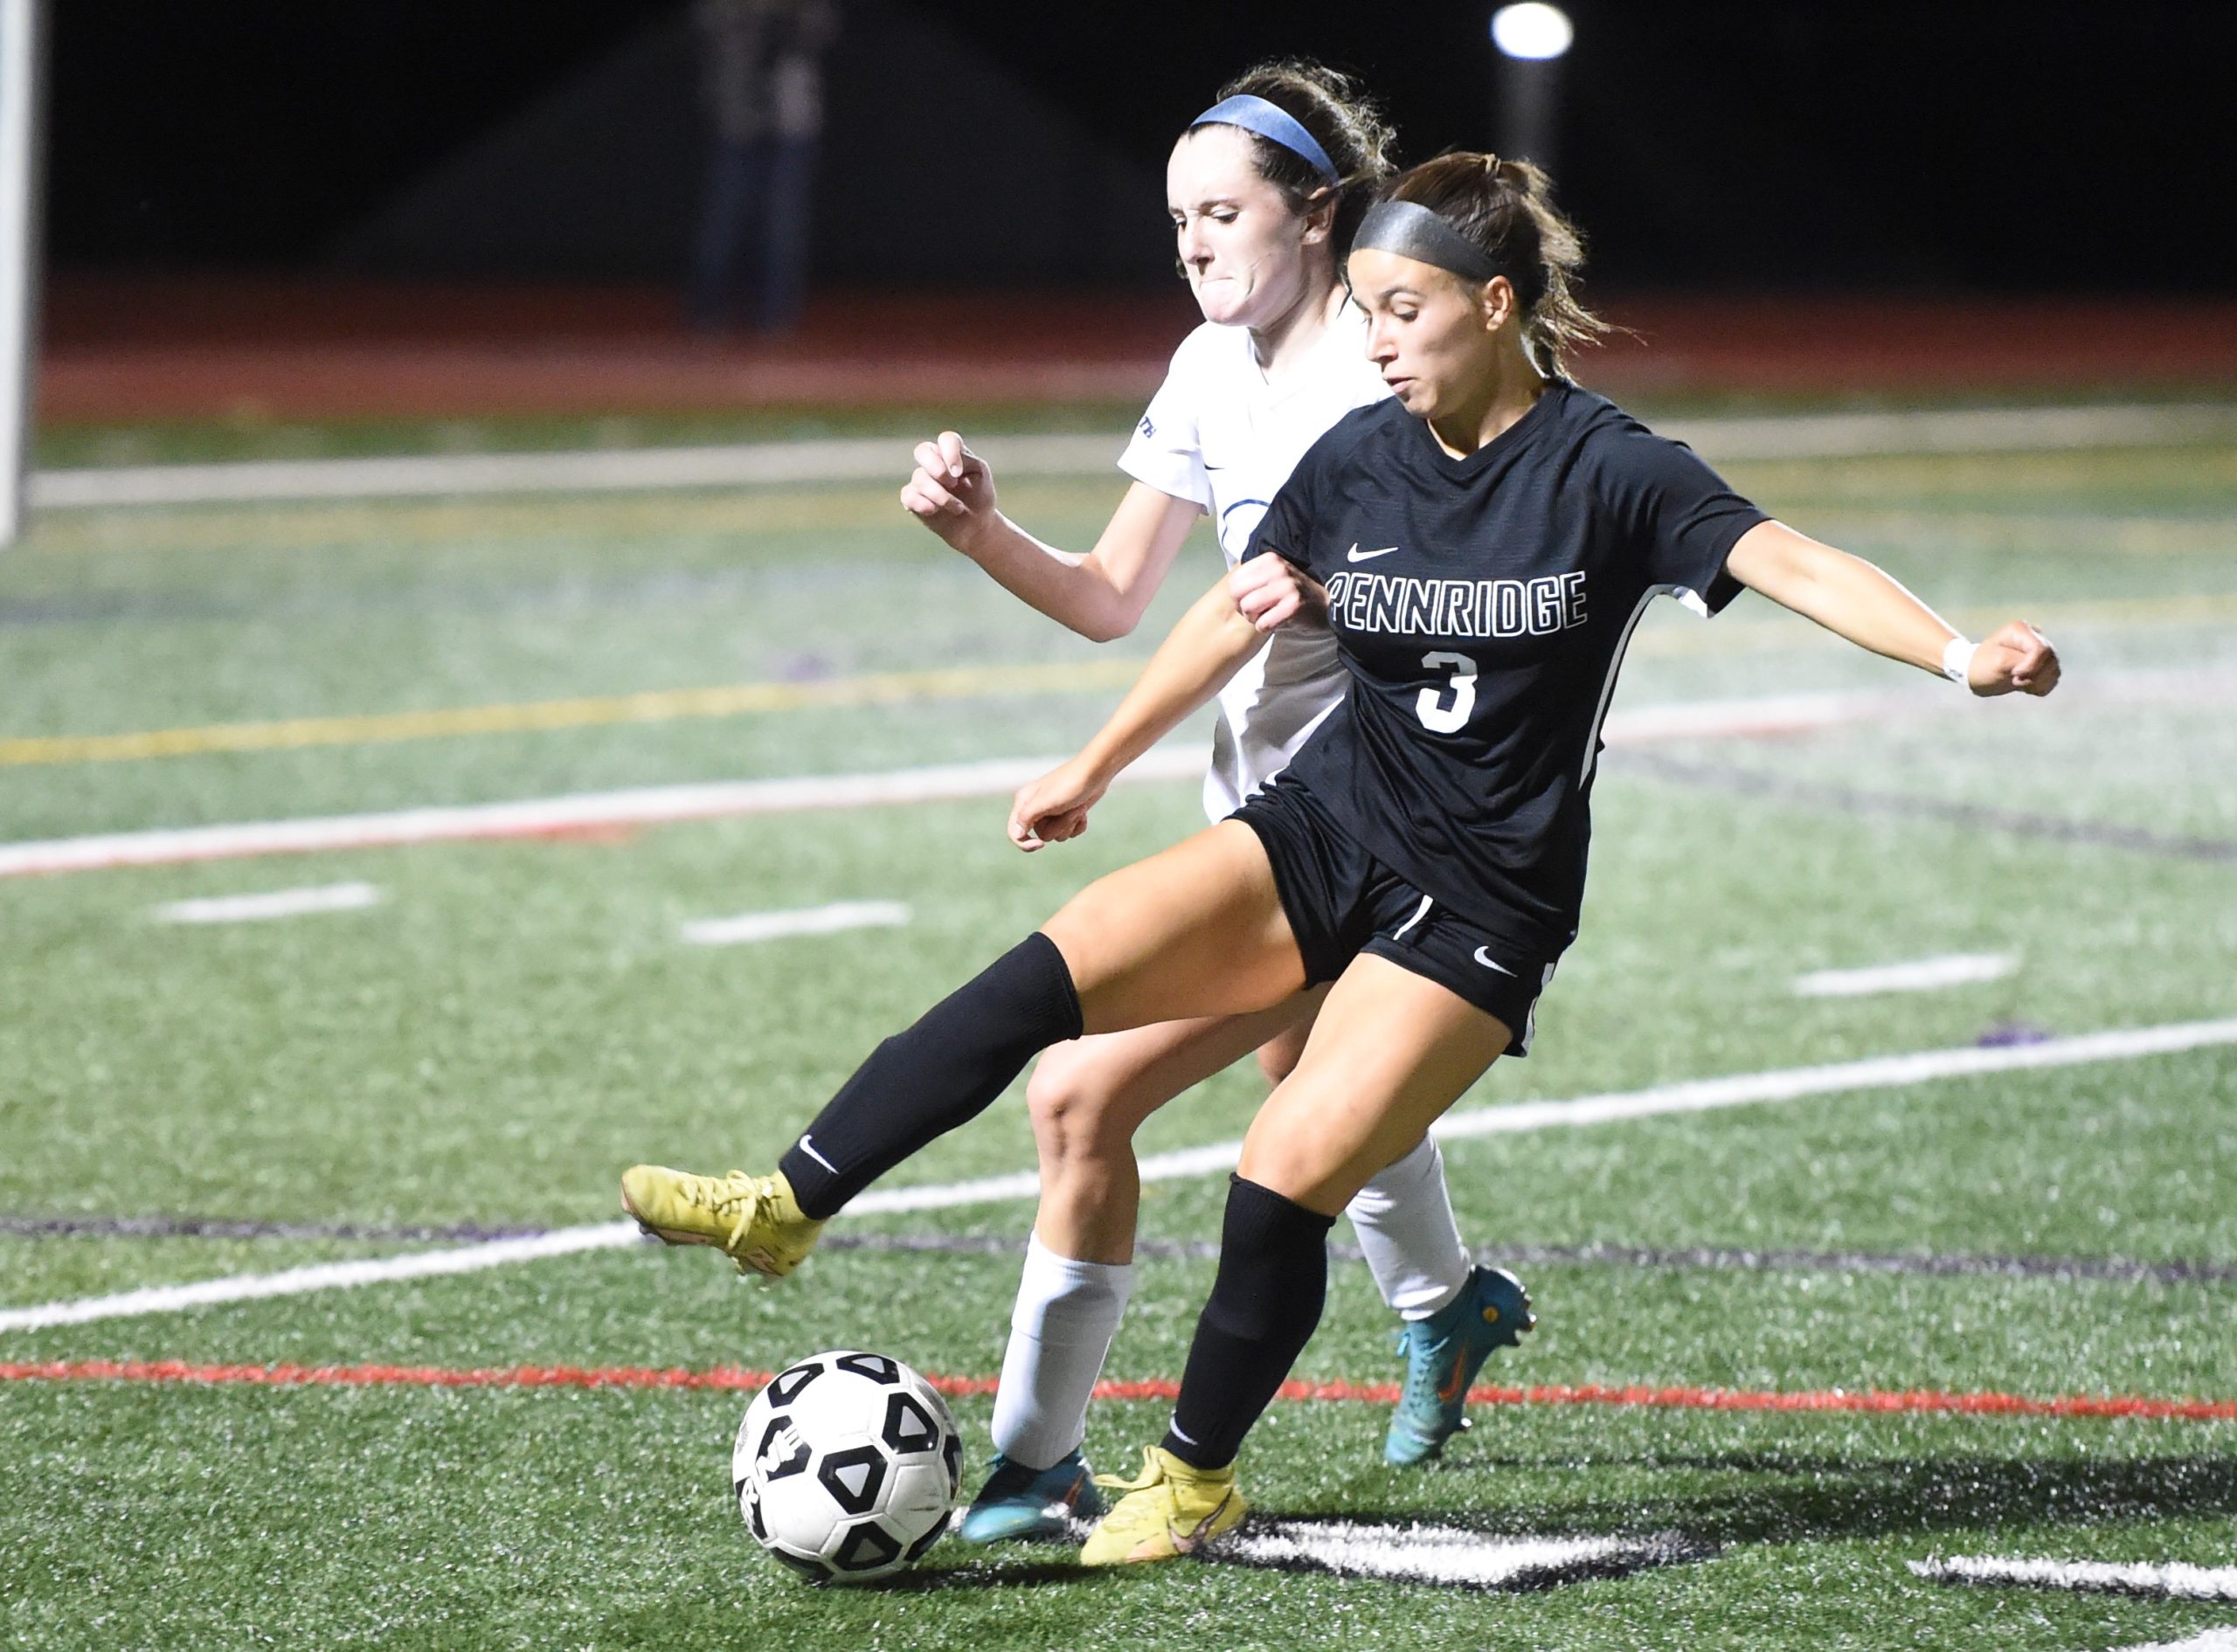 Tomlinson, Pennridge keep working to get past Smedley, CR South – PA ...